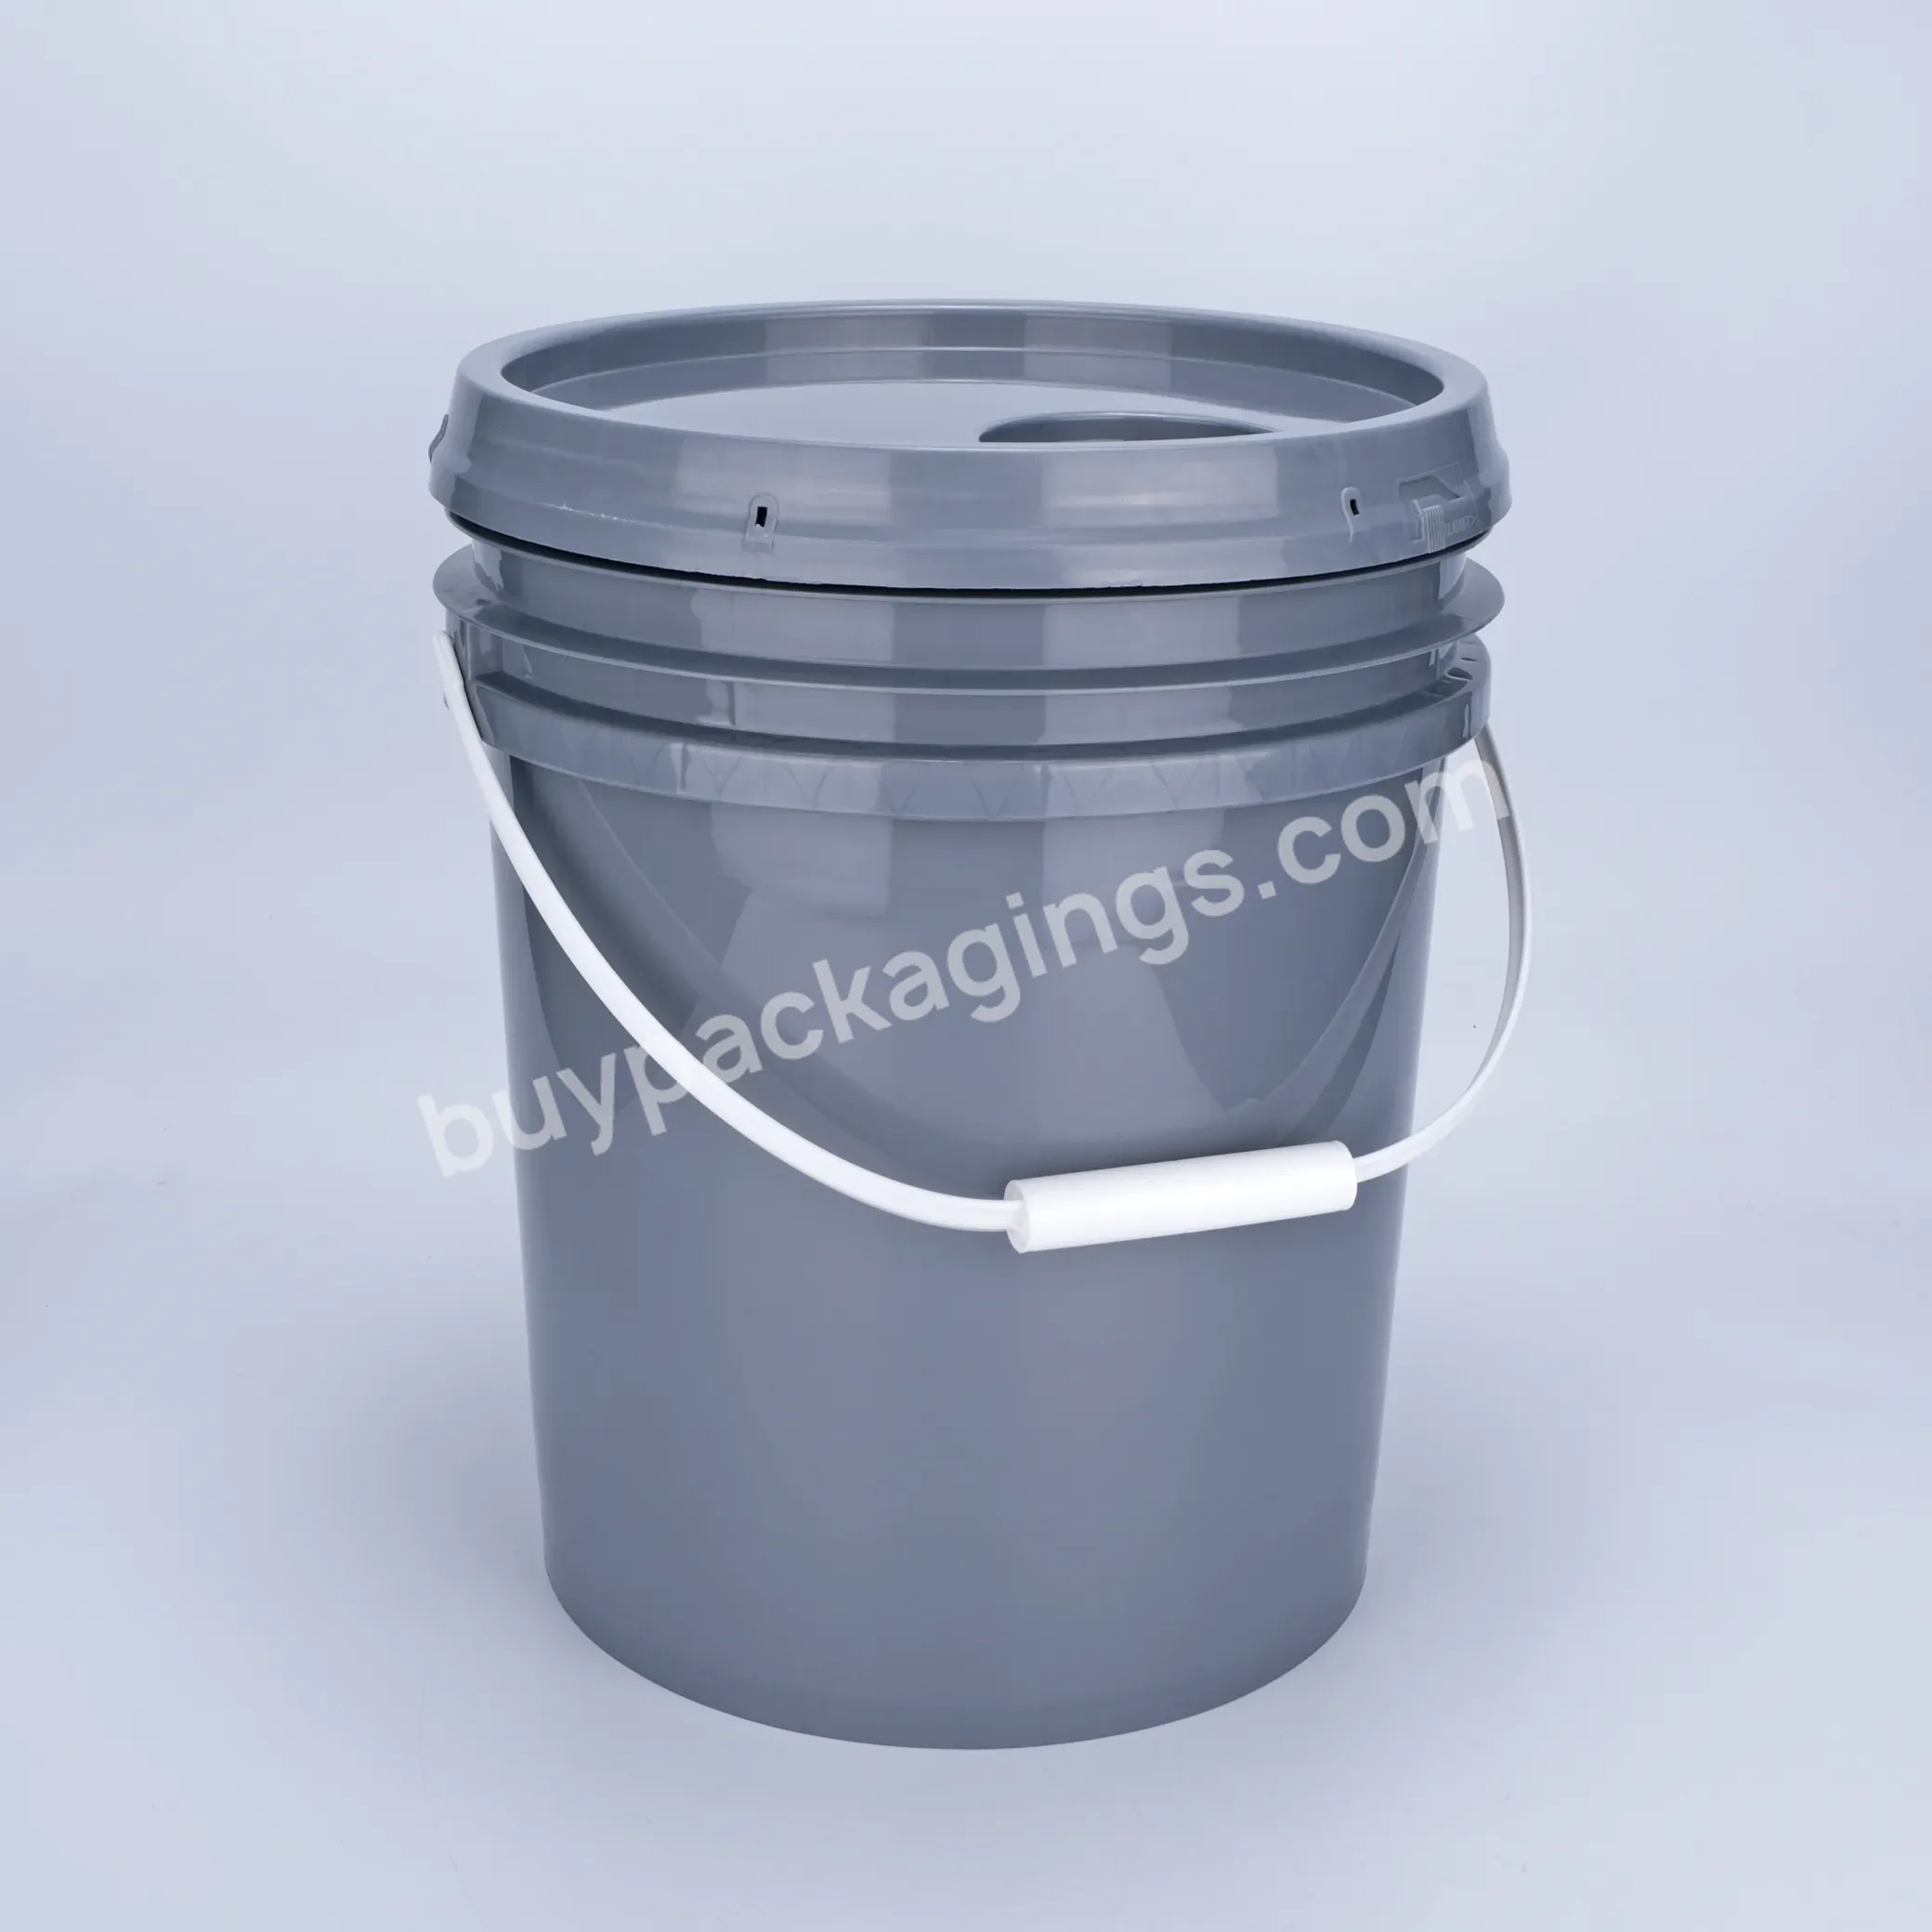 Factory Hot Sale Wholesale Color Customized Plastic Bucket For Container 20l With Handle Plastic Bucket - Buy Plastic Bucket,Plastic Bucket 20 Liter,Plastic Bucket With Handle.